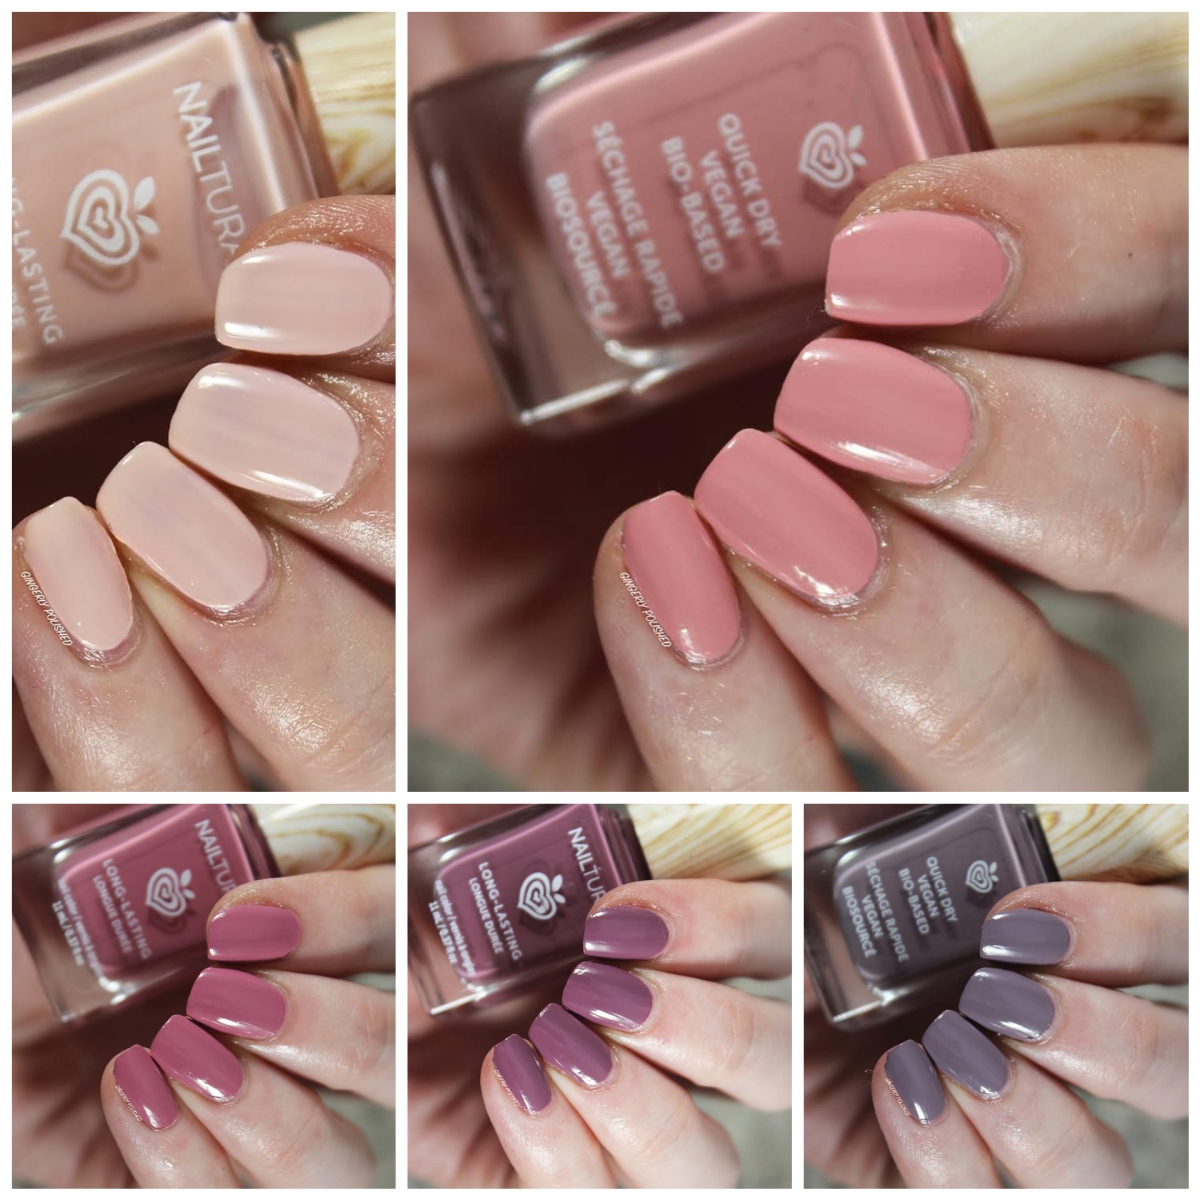 Nailtural Malibu Collection – Swatches & Review – GINGERLY POLISHED